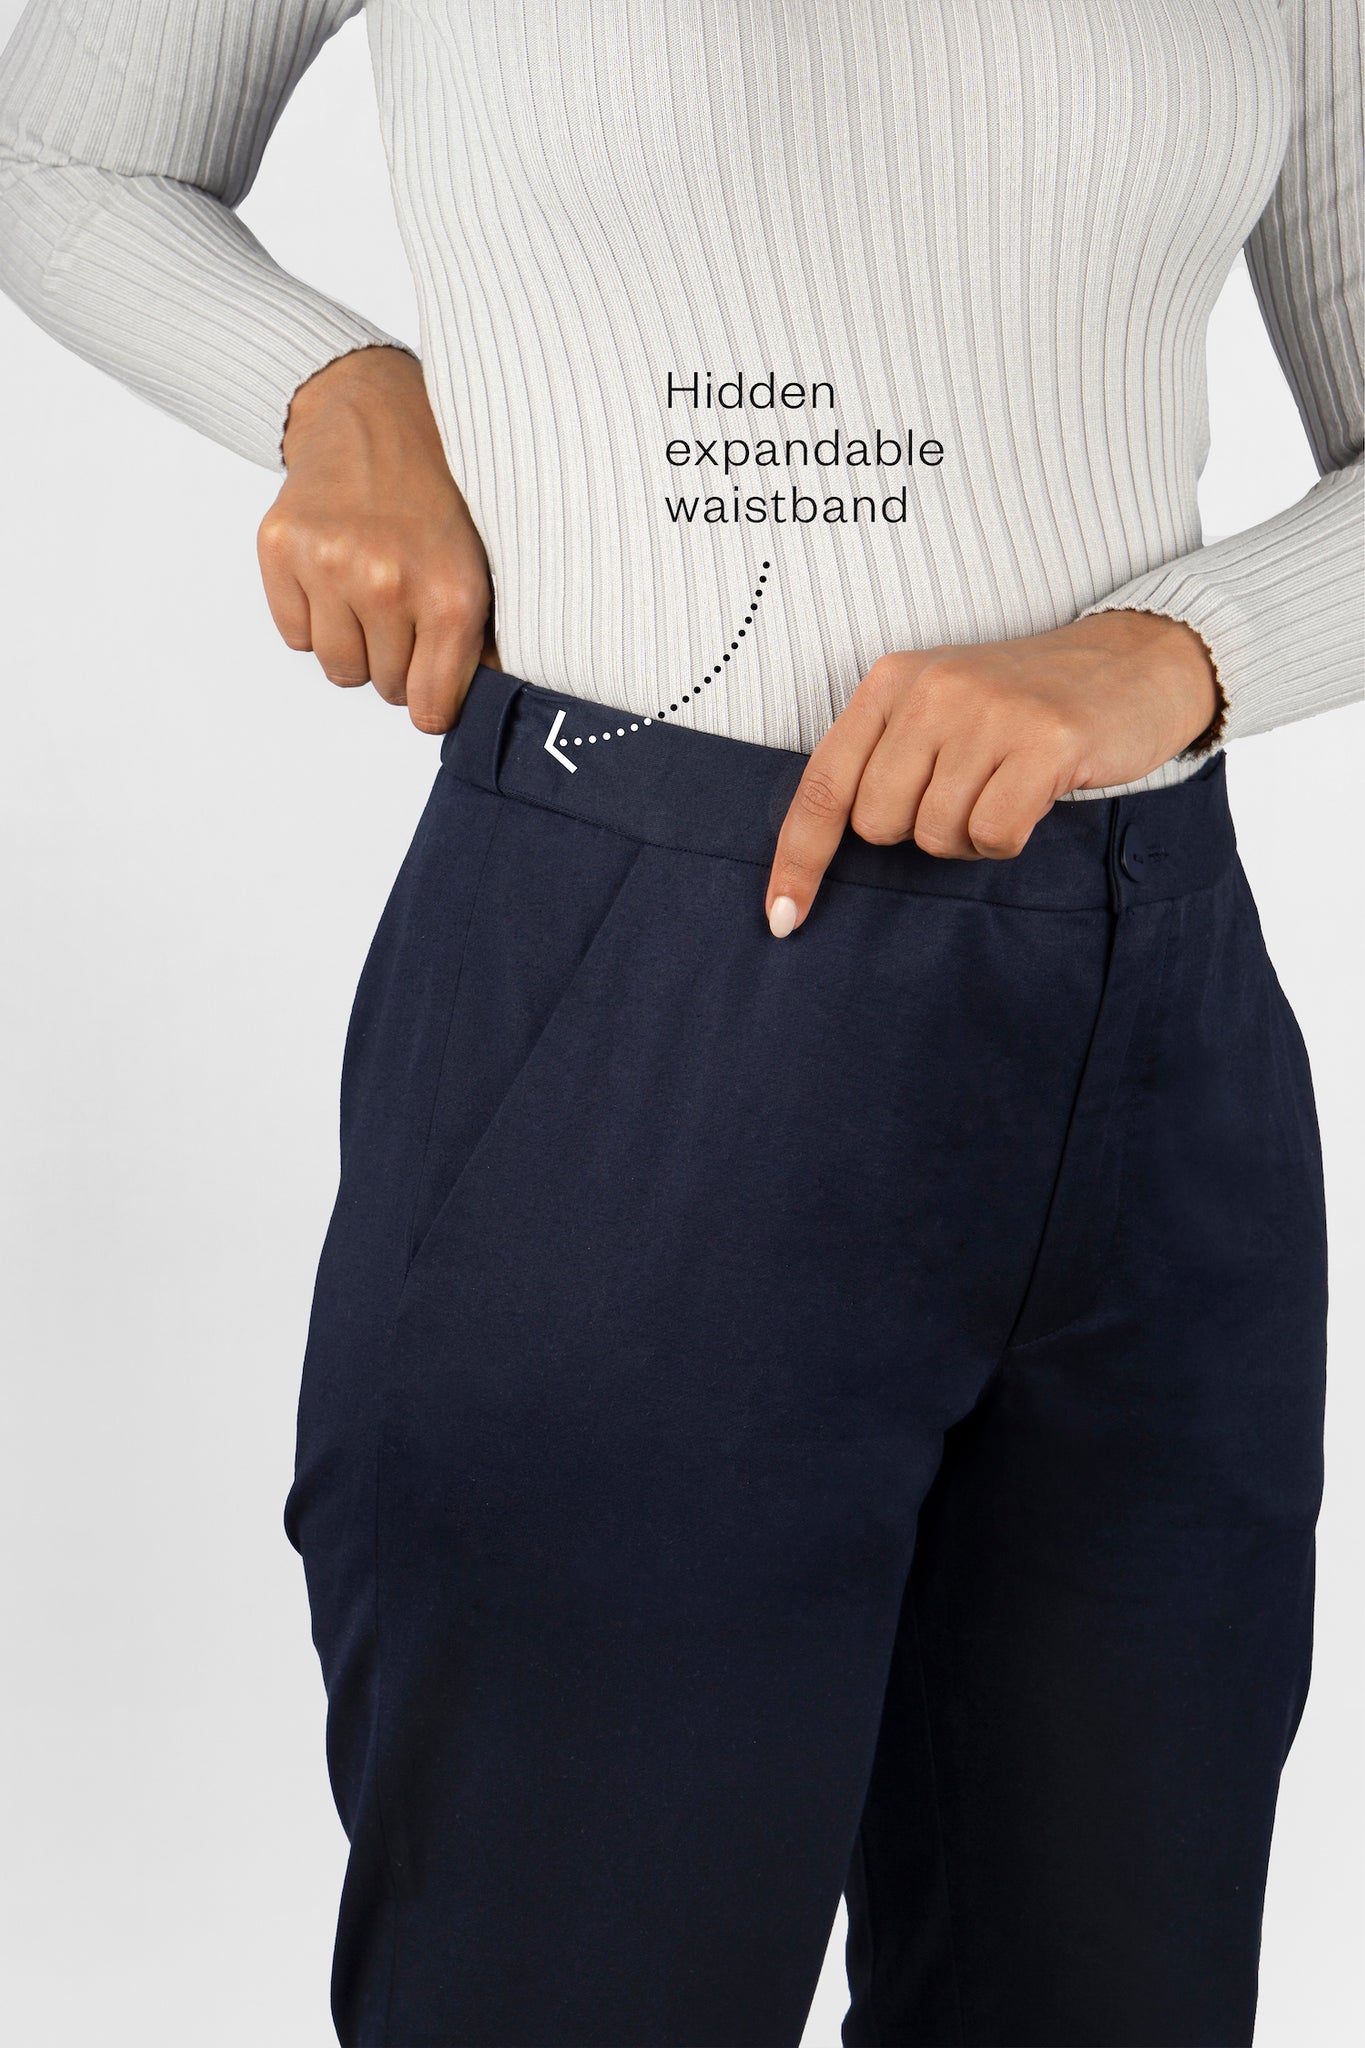 The Flex Waist Pant by Aam is a chic, cotton trouser with a hidden expandable waistband that provides 2-3" of stretch at the waist and a comfortable fit - even on your off days. It is made from a breathable, 98% organic cotton with 2% stretch and is fully machine washable. The pant also has a 4" hem which makes it easy to lengthen or cuff, as needed. The Flex Waist Pant comes in two colors - navy blue (pictured here) and forest green..